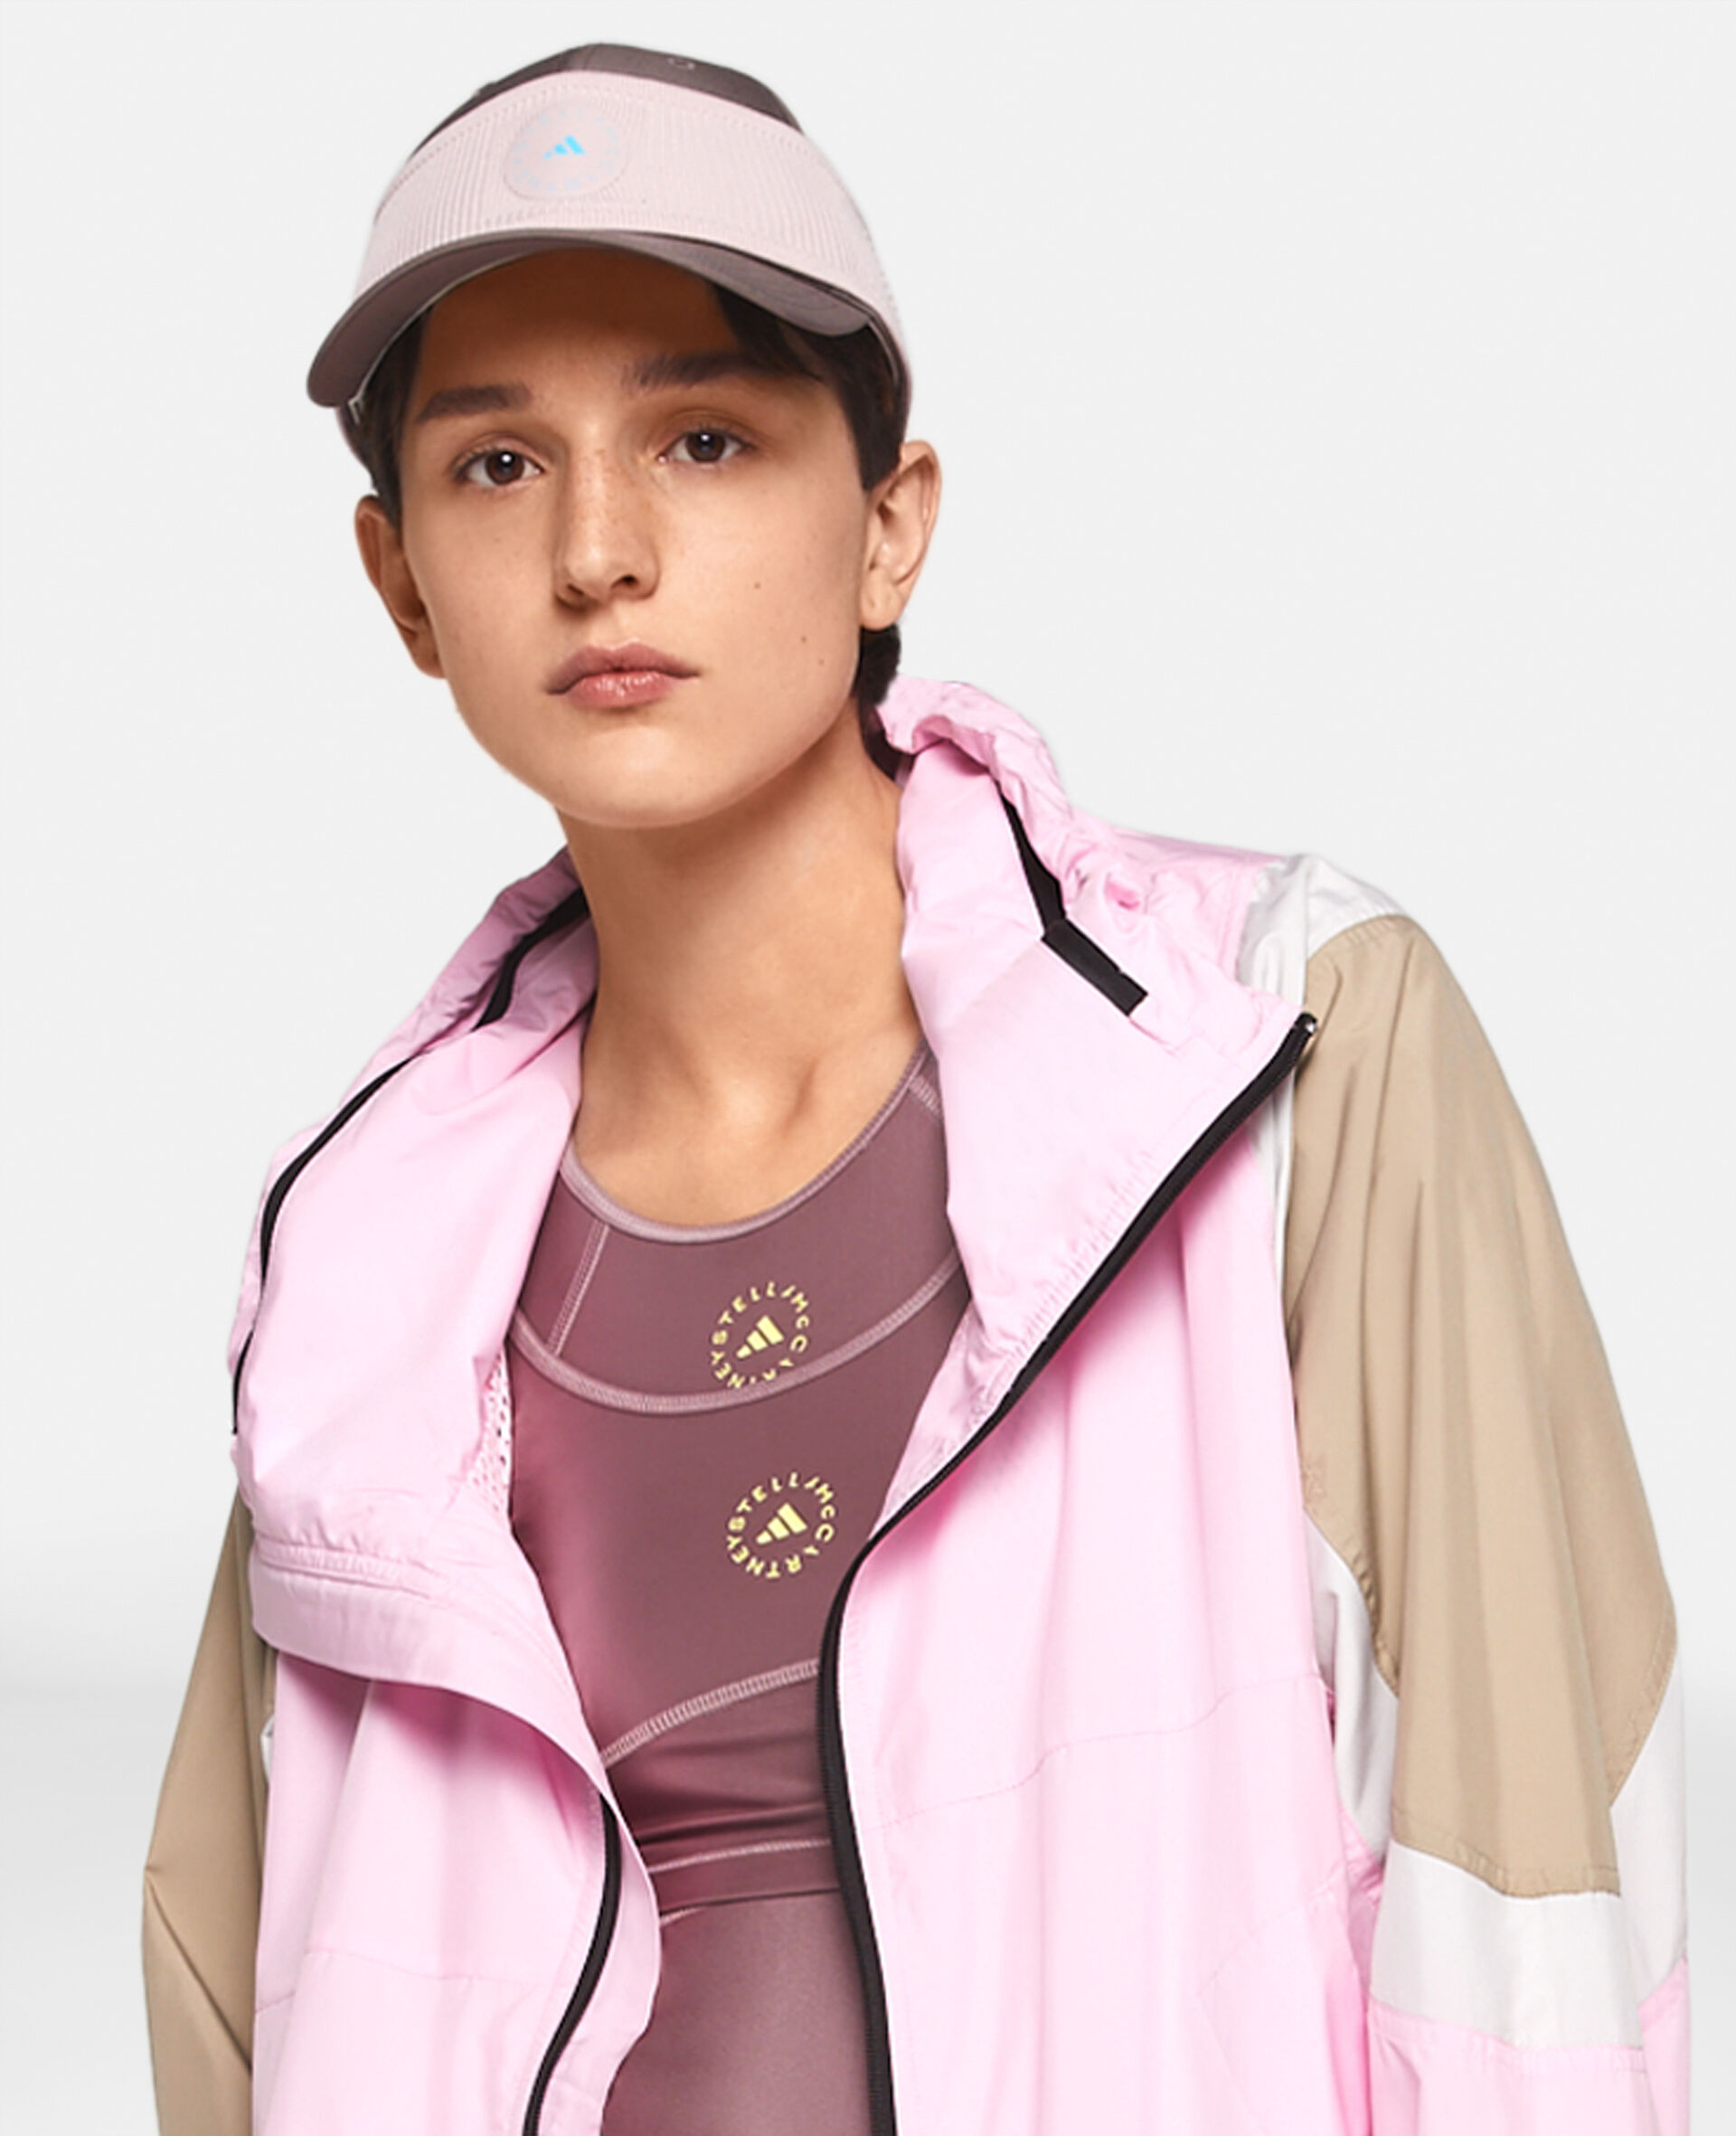 Sport Chek - A capsule sports collection for teenage girls consisting of  style-driven, affordable pieces. adidas expertise for sportswear couples  with Stella McCartney's expertise for fashion. Available in Canada  exclusively at Sport